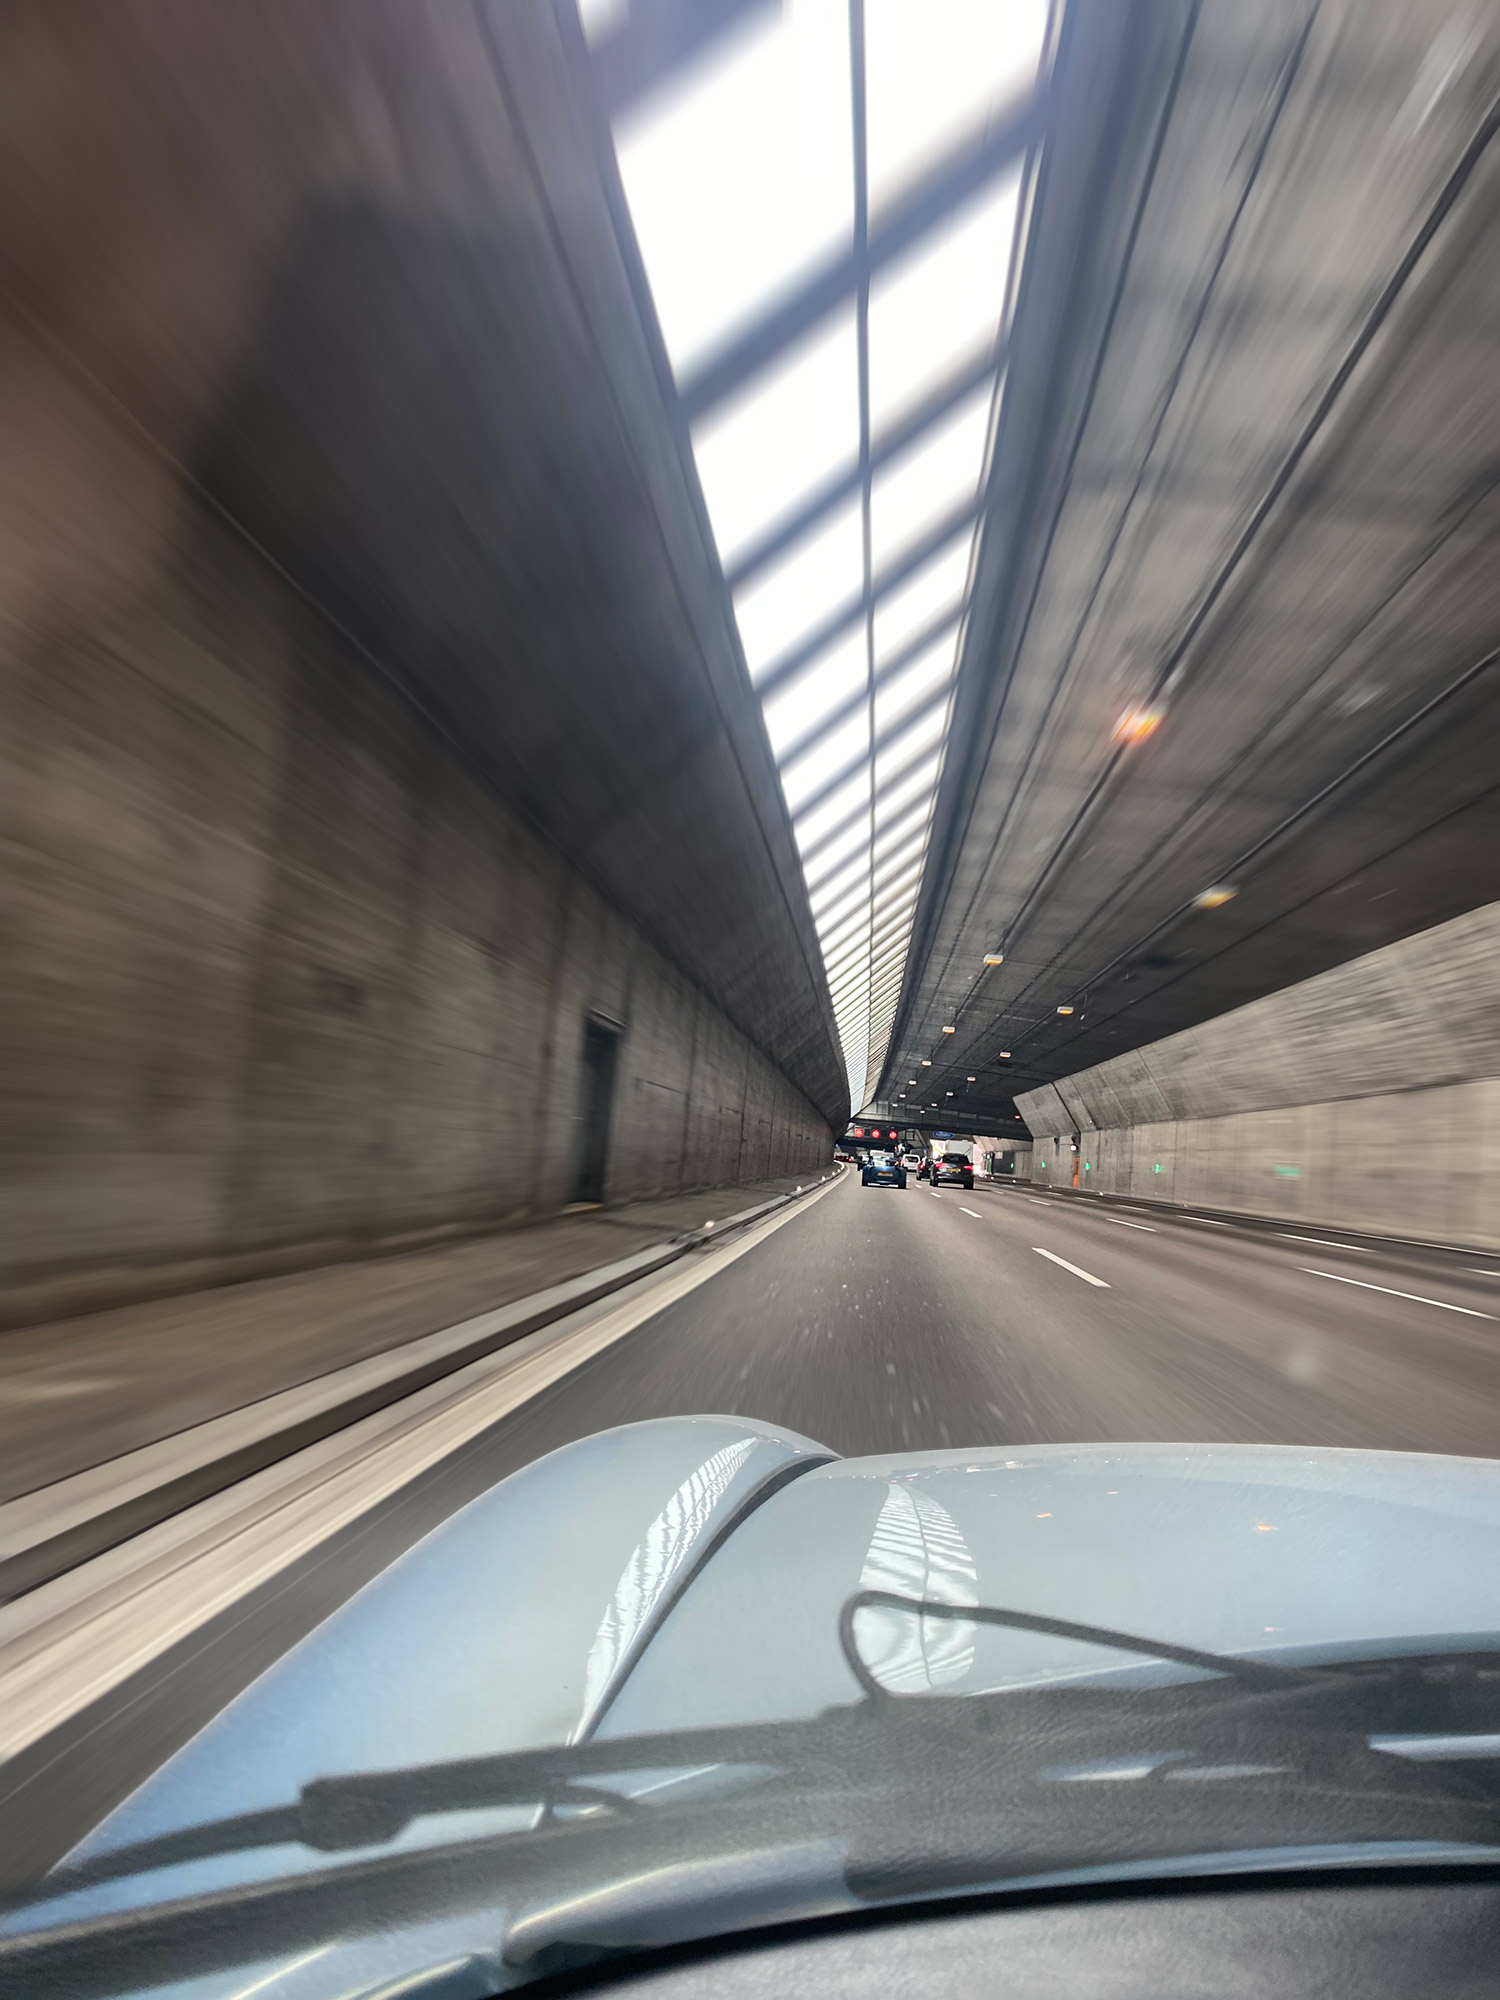 Going through a tunnel on the way to the Nurburgring in the Cerbera